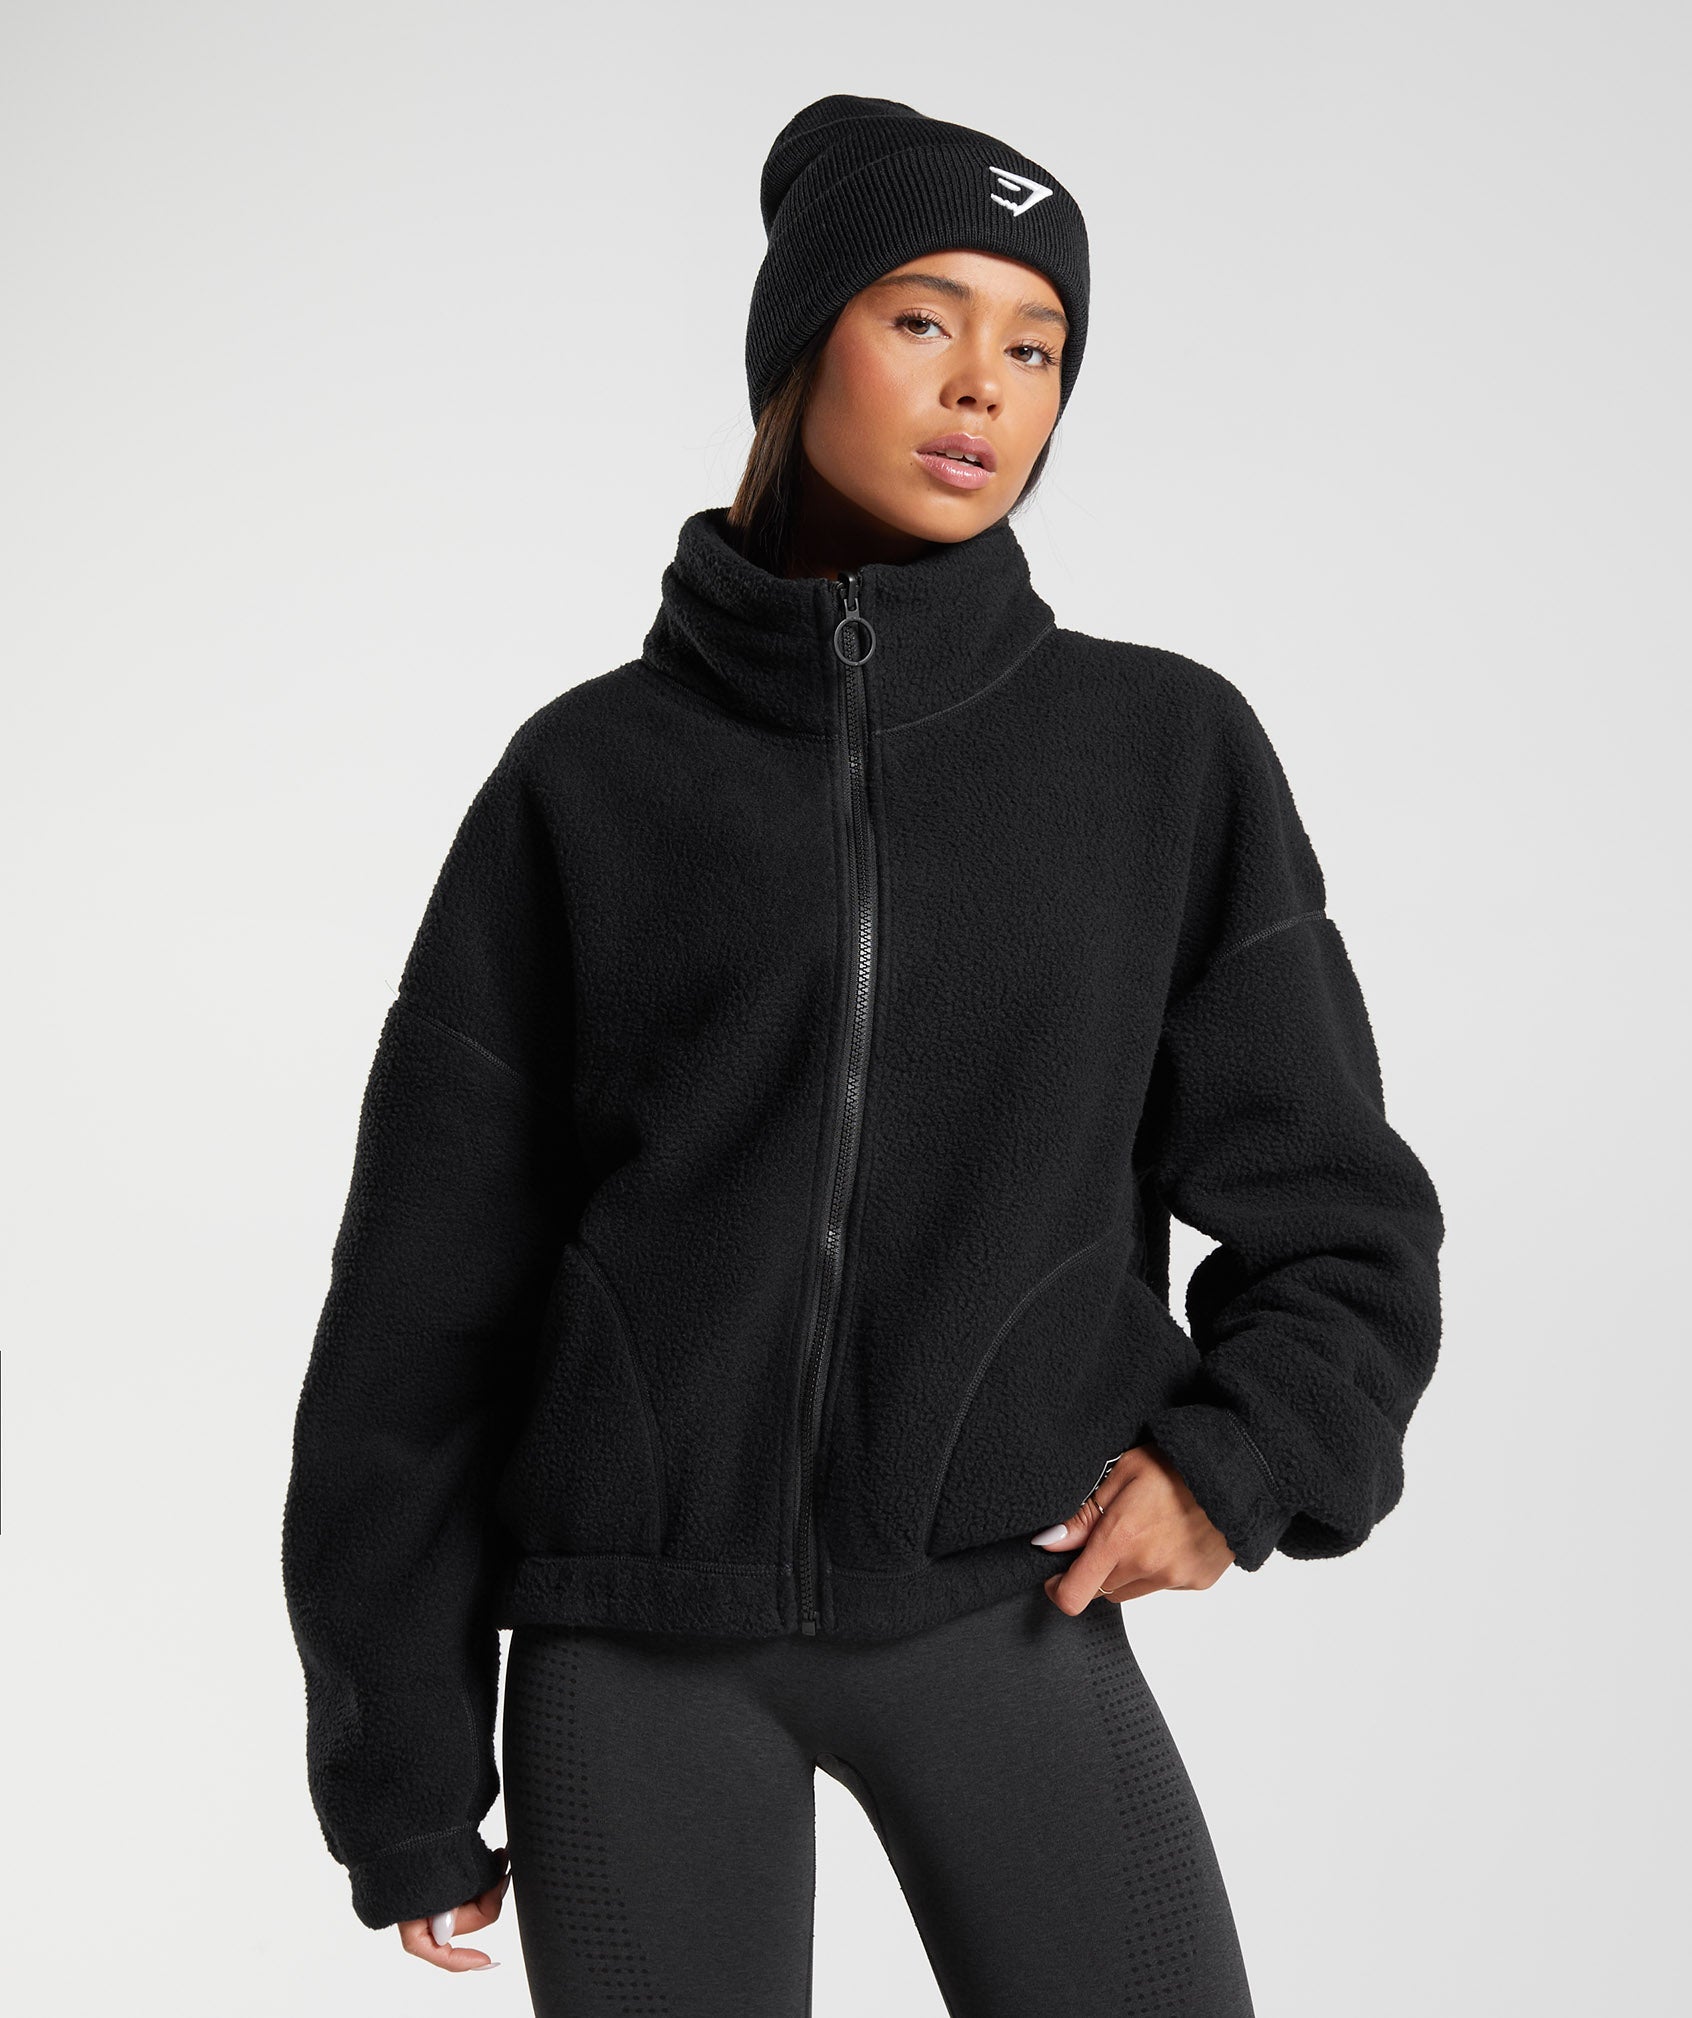 THE GYM PEOPLE Women's Fleece Cropped Jacket Full Zip Stand Collar Workout  Short Sherpa Coats with Pockets Drawstring Hem at  Women's Coats Shop